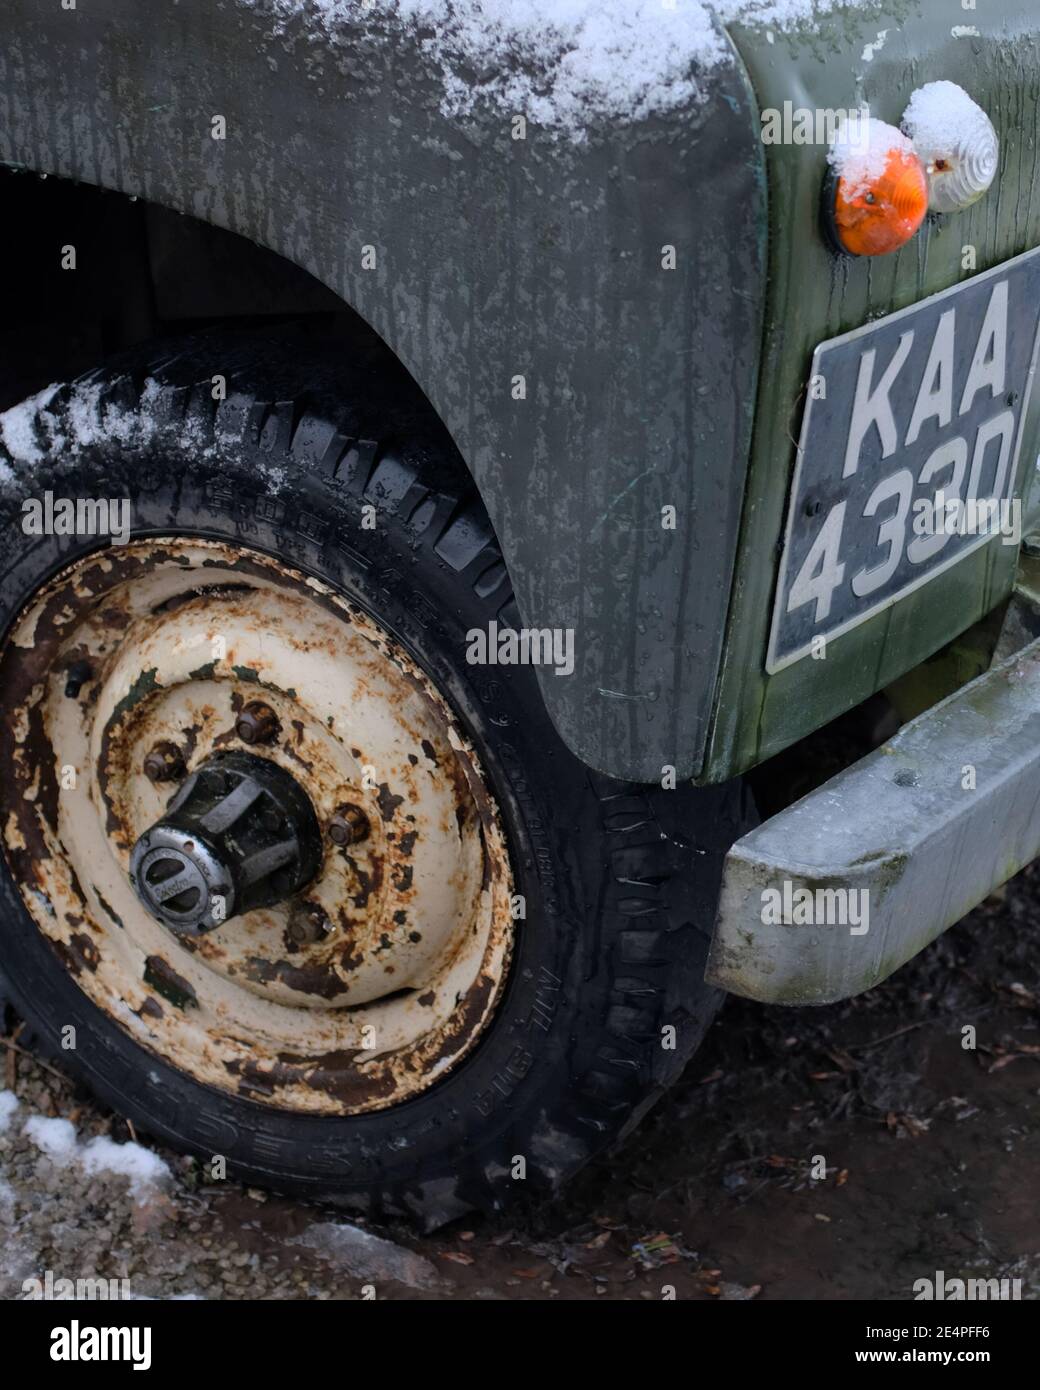 January 2021 - Old series 2 Land Rover with free wheel hub in Axbridge near Cheddar, Somerset, UK. Stock Photo